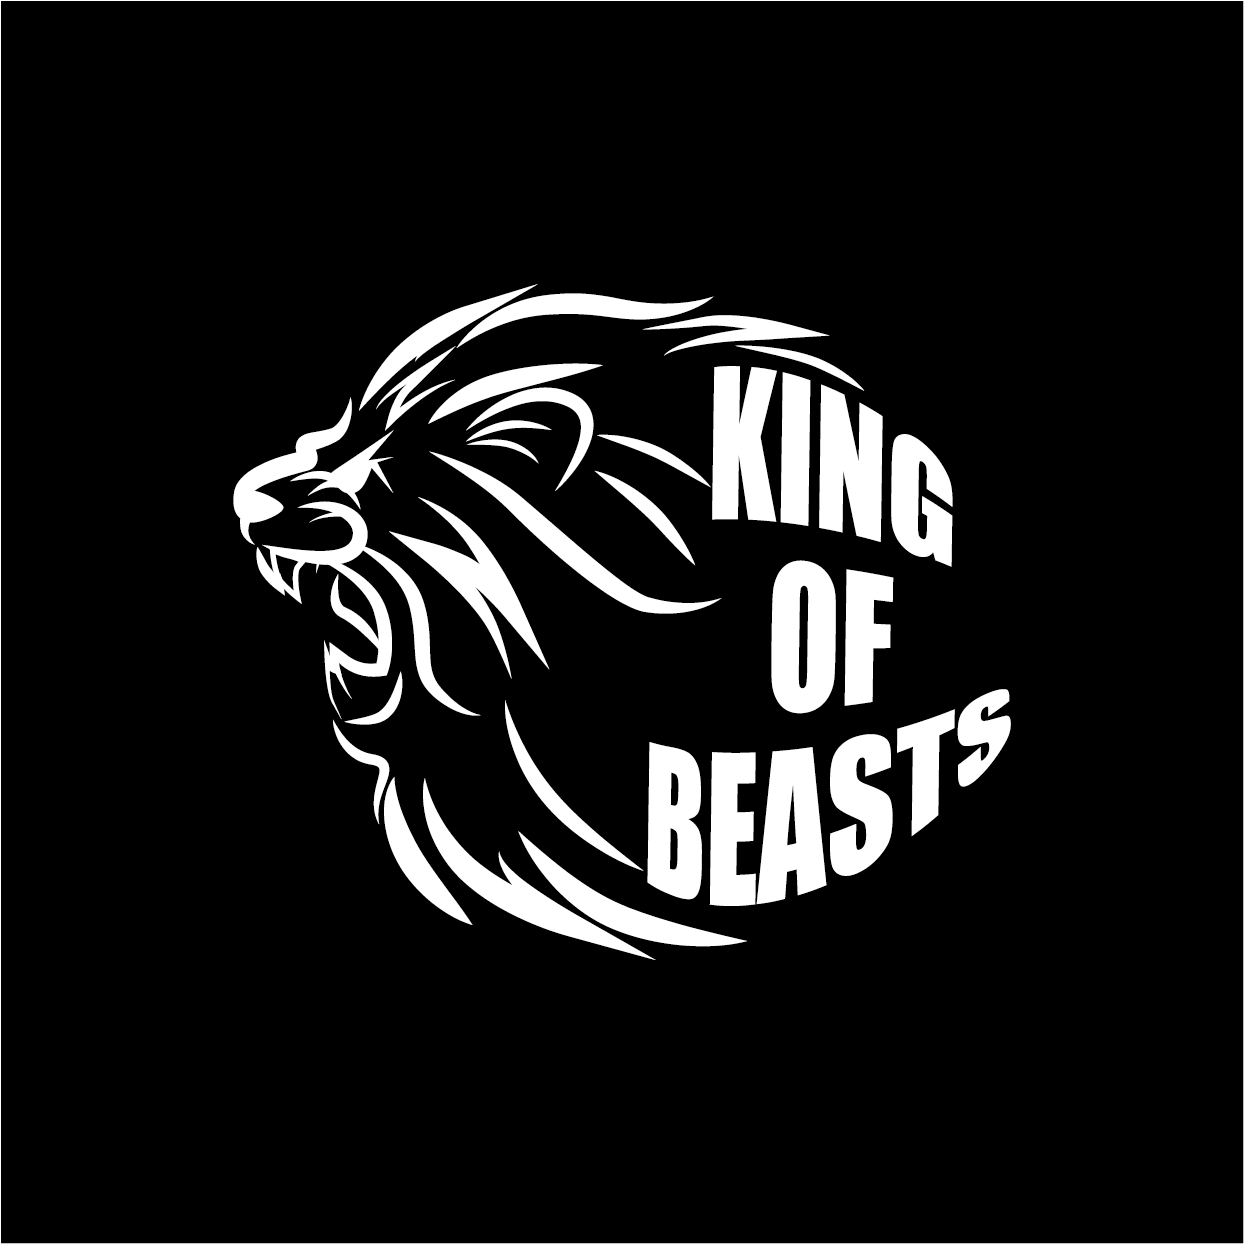 king of beasts